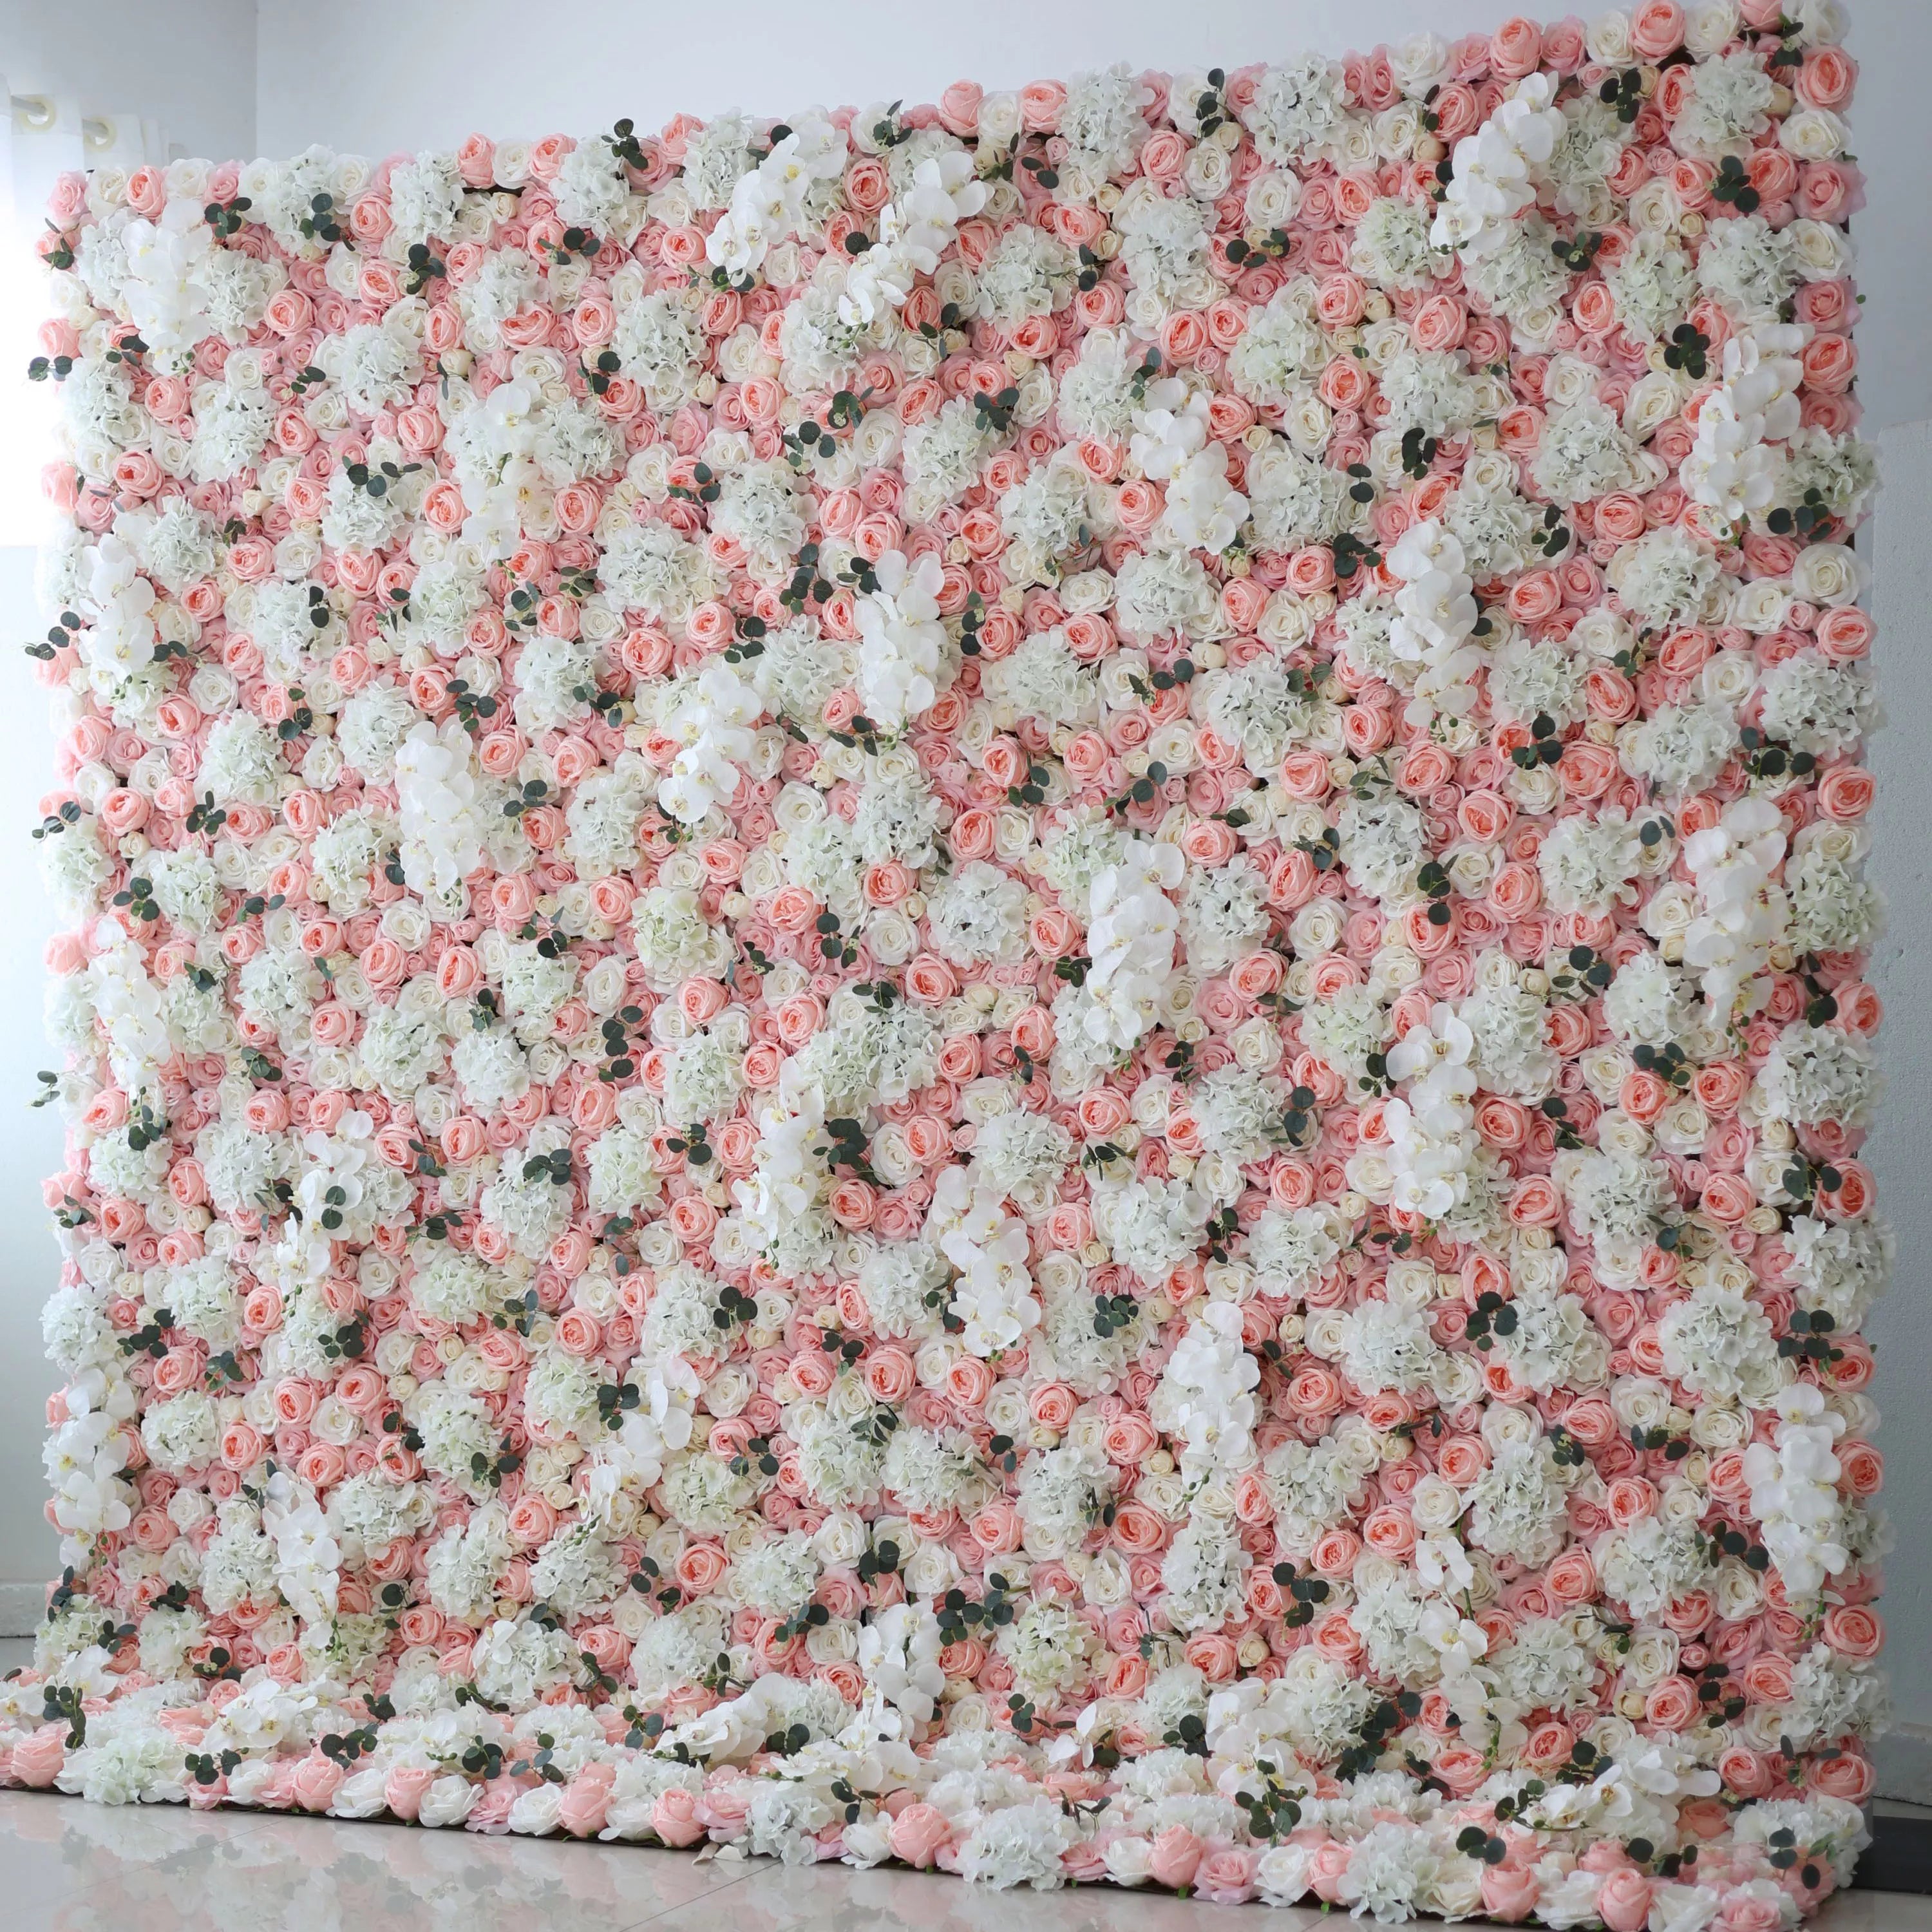 Valar Flowers Roll Up Fabric Artificial Petite Orchid and Brandy Rose with White Roses Flower Wall Wedding Backdrop, Floral Party Decor, Event Photography-VF-027